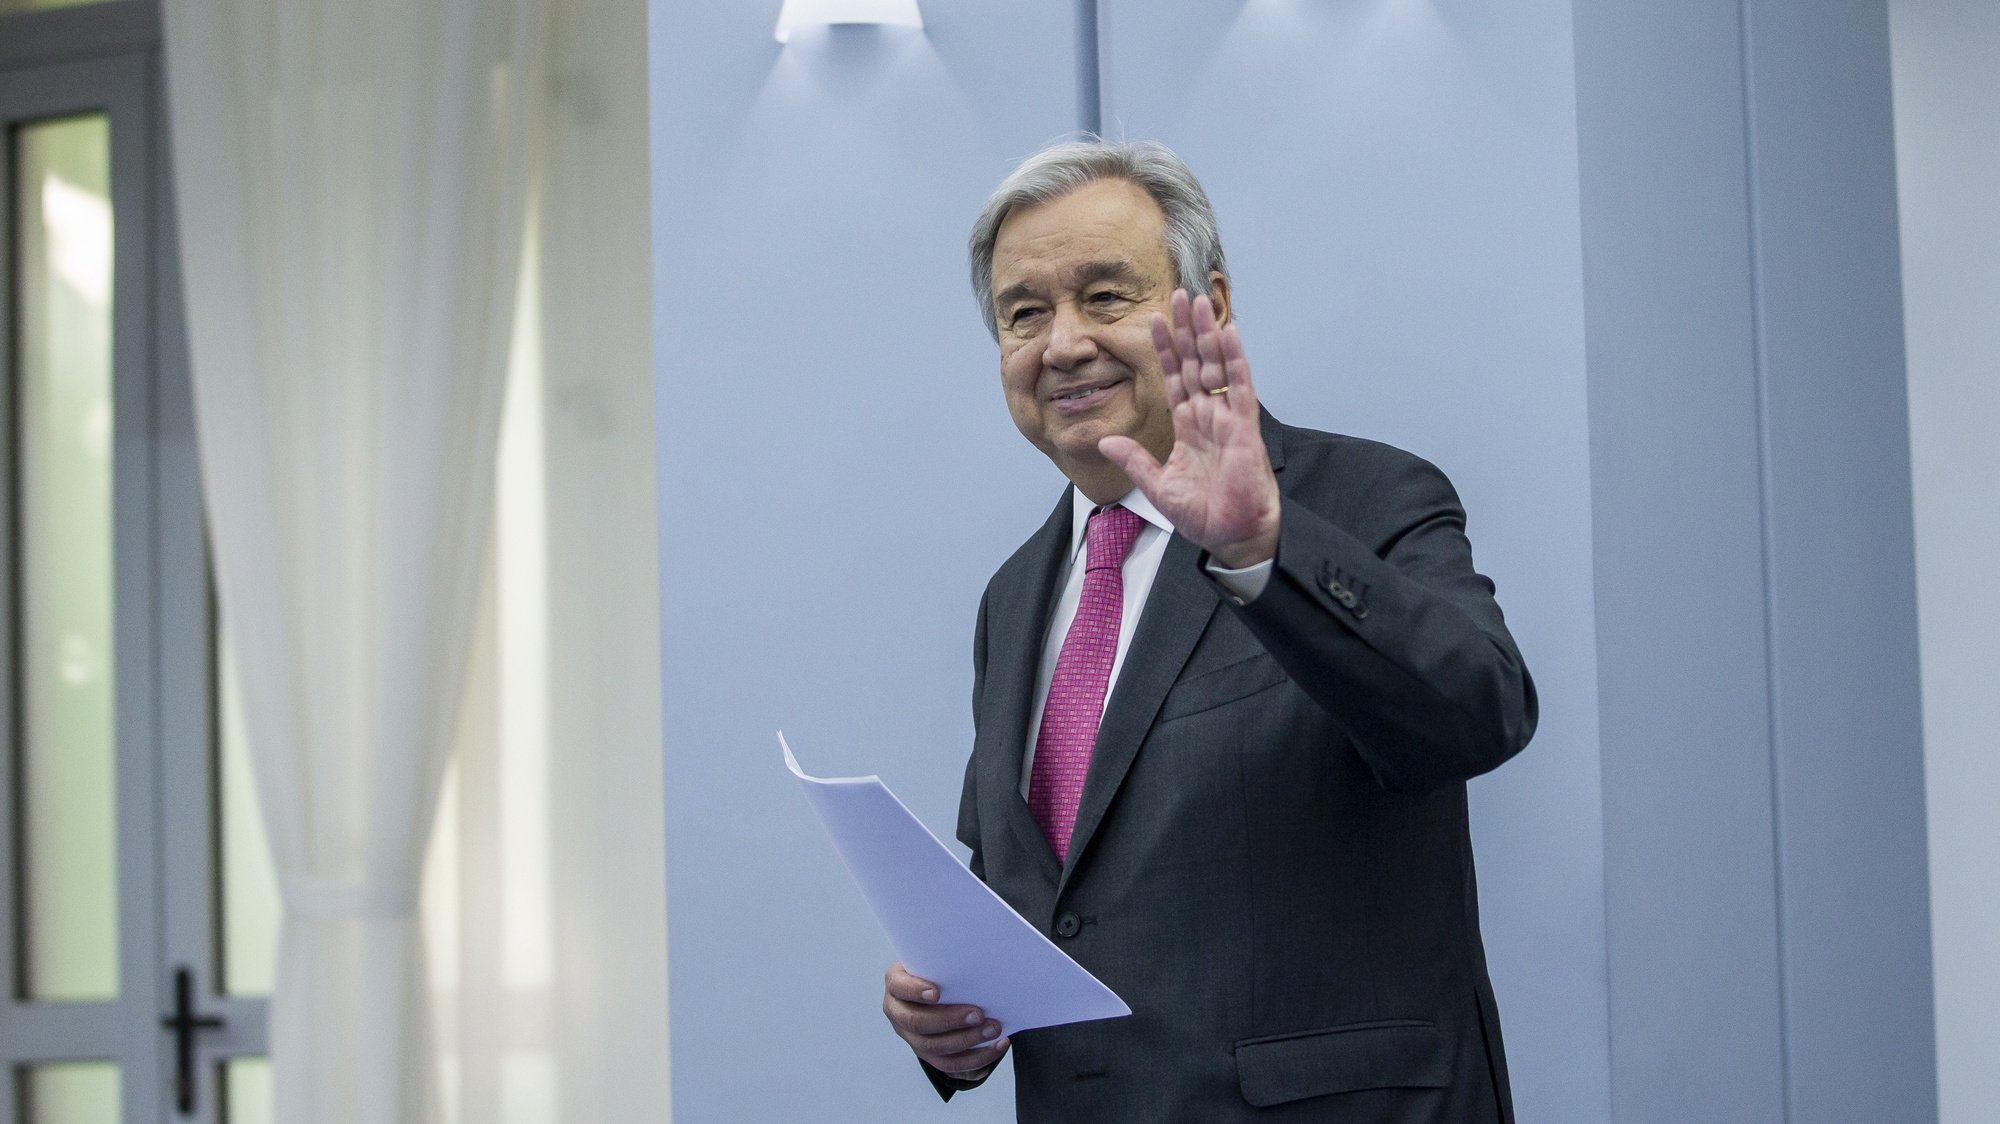 epa09936610 UN Secretary-General Antonio Guterres waves to media after a joint press conference with Moldovan Prime Minister Natalia Gavrilita (not seen) during his two-day official visit in the government building in Chisinau, Moldova, on 09 May 2022.  EPA/DUMITRU DORU